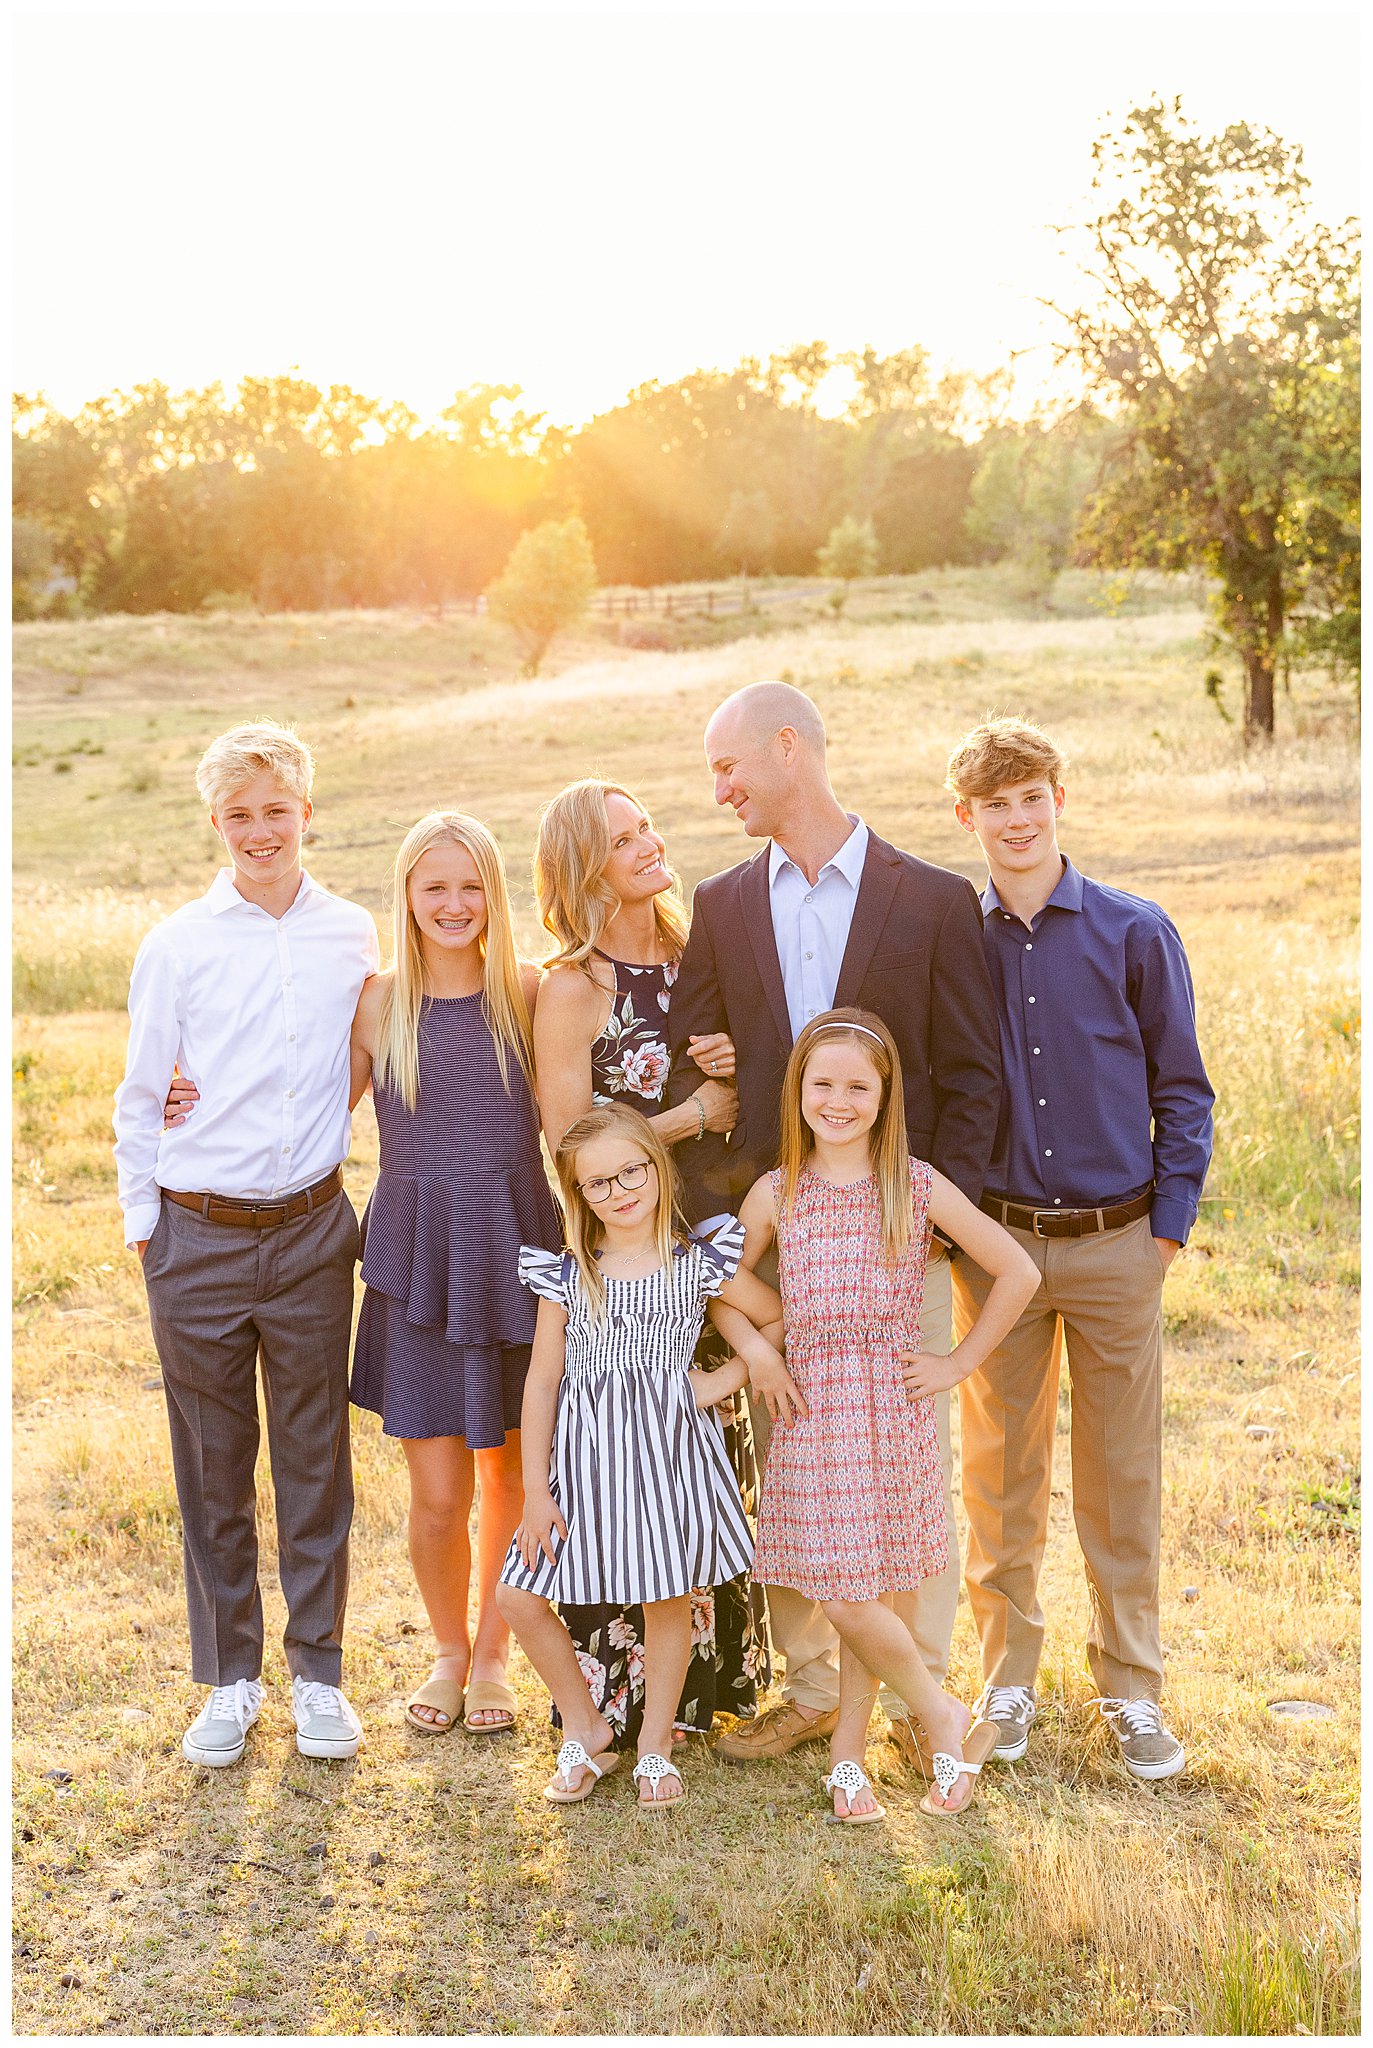 Spring Family Session in Wildflower Field | Britta + Mike